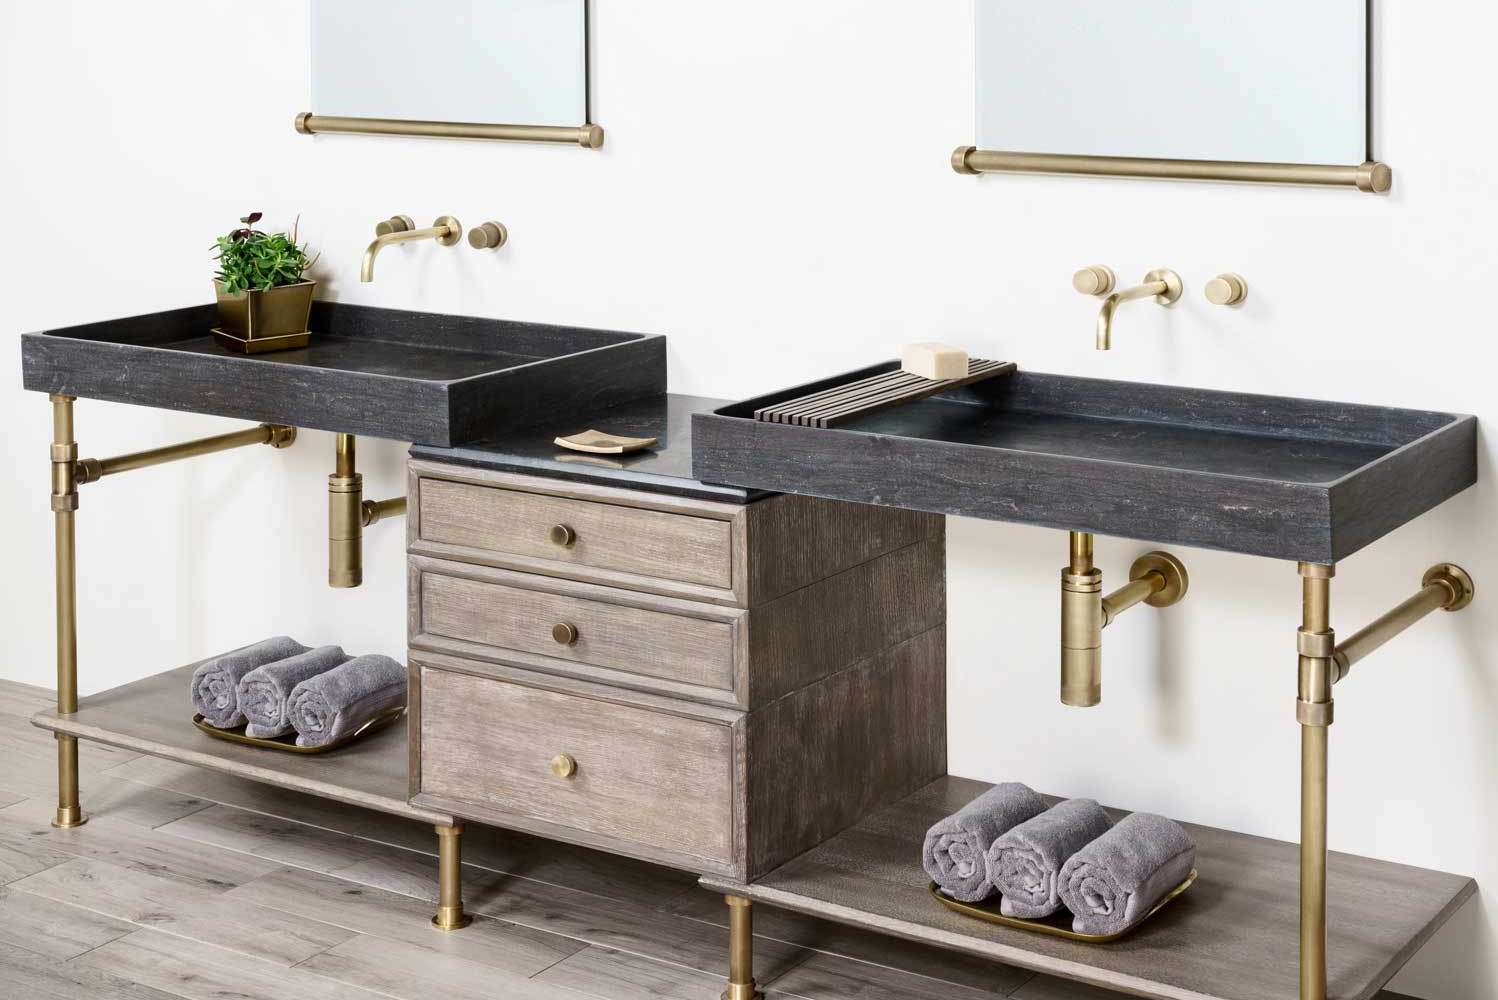 Stone Forest launched the Elemental collection of vanities complementing the companys monolithic sinks 